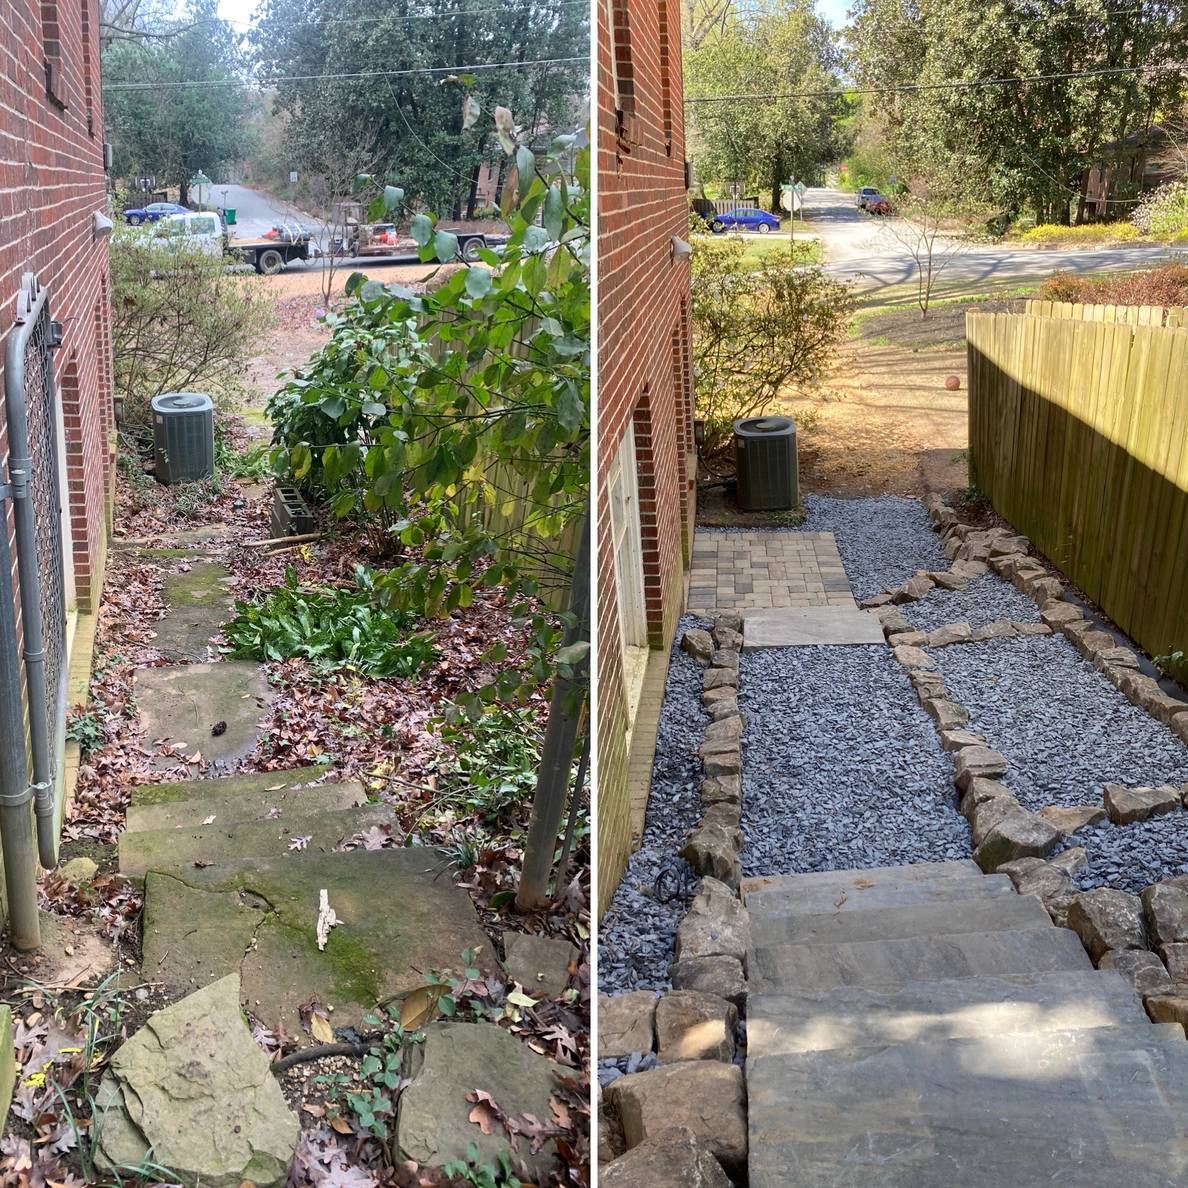 Before and After photos of some outdoor steps along the side of house. In the Before photo are broken concrete steps flanked by fallen leaves and bushes. In the After photo are stone tread steps with slate chips and stone borders.